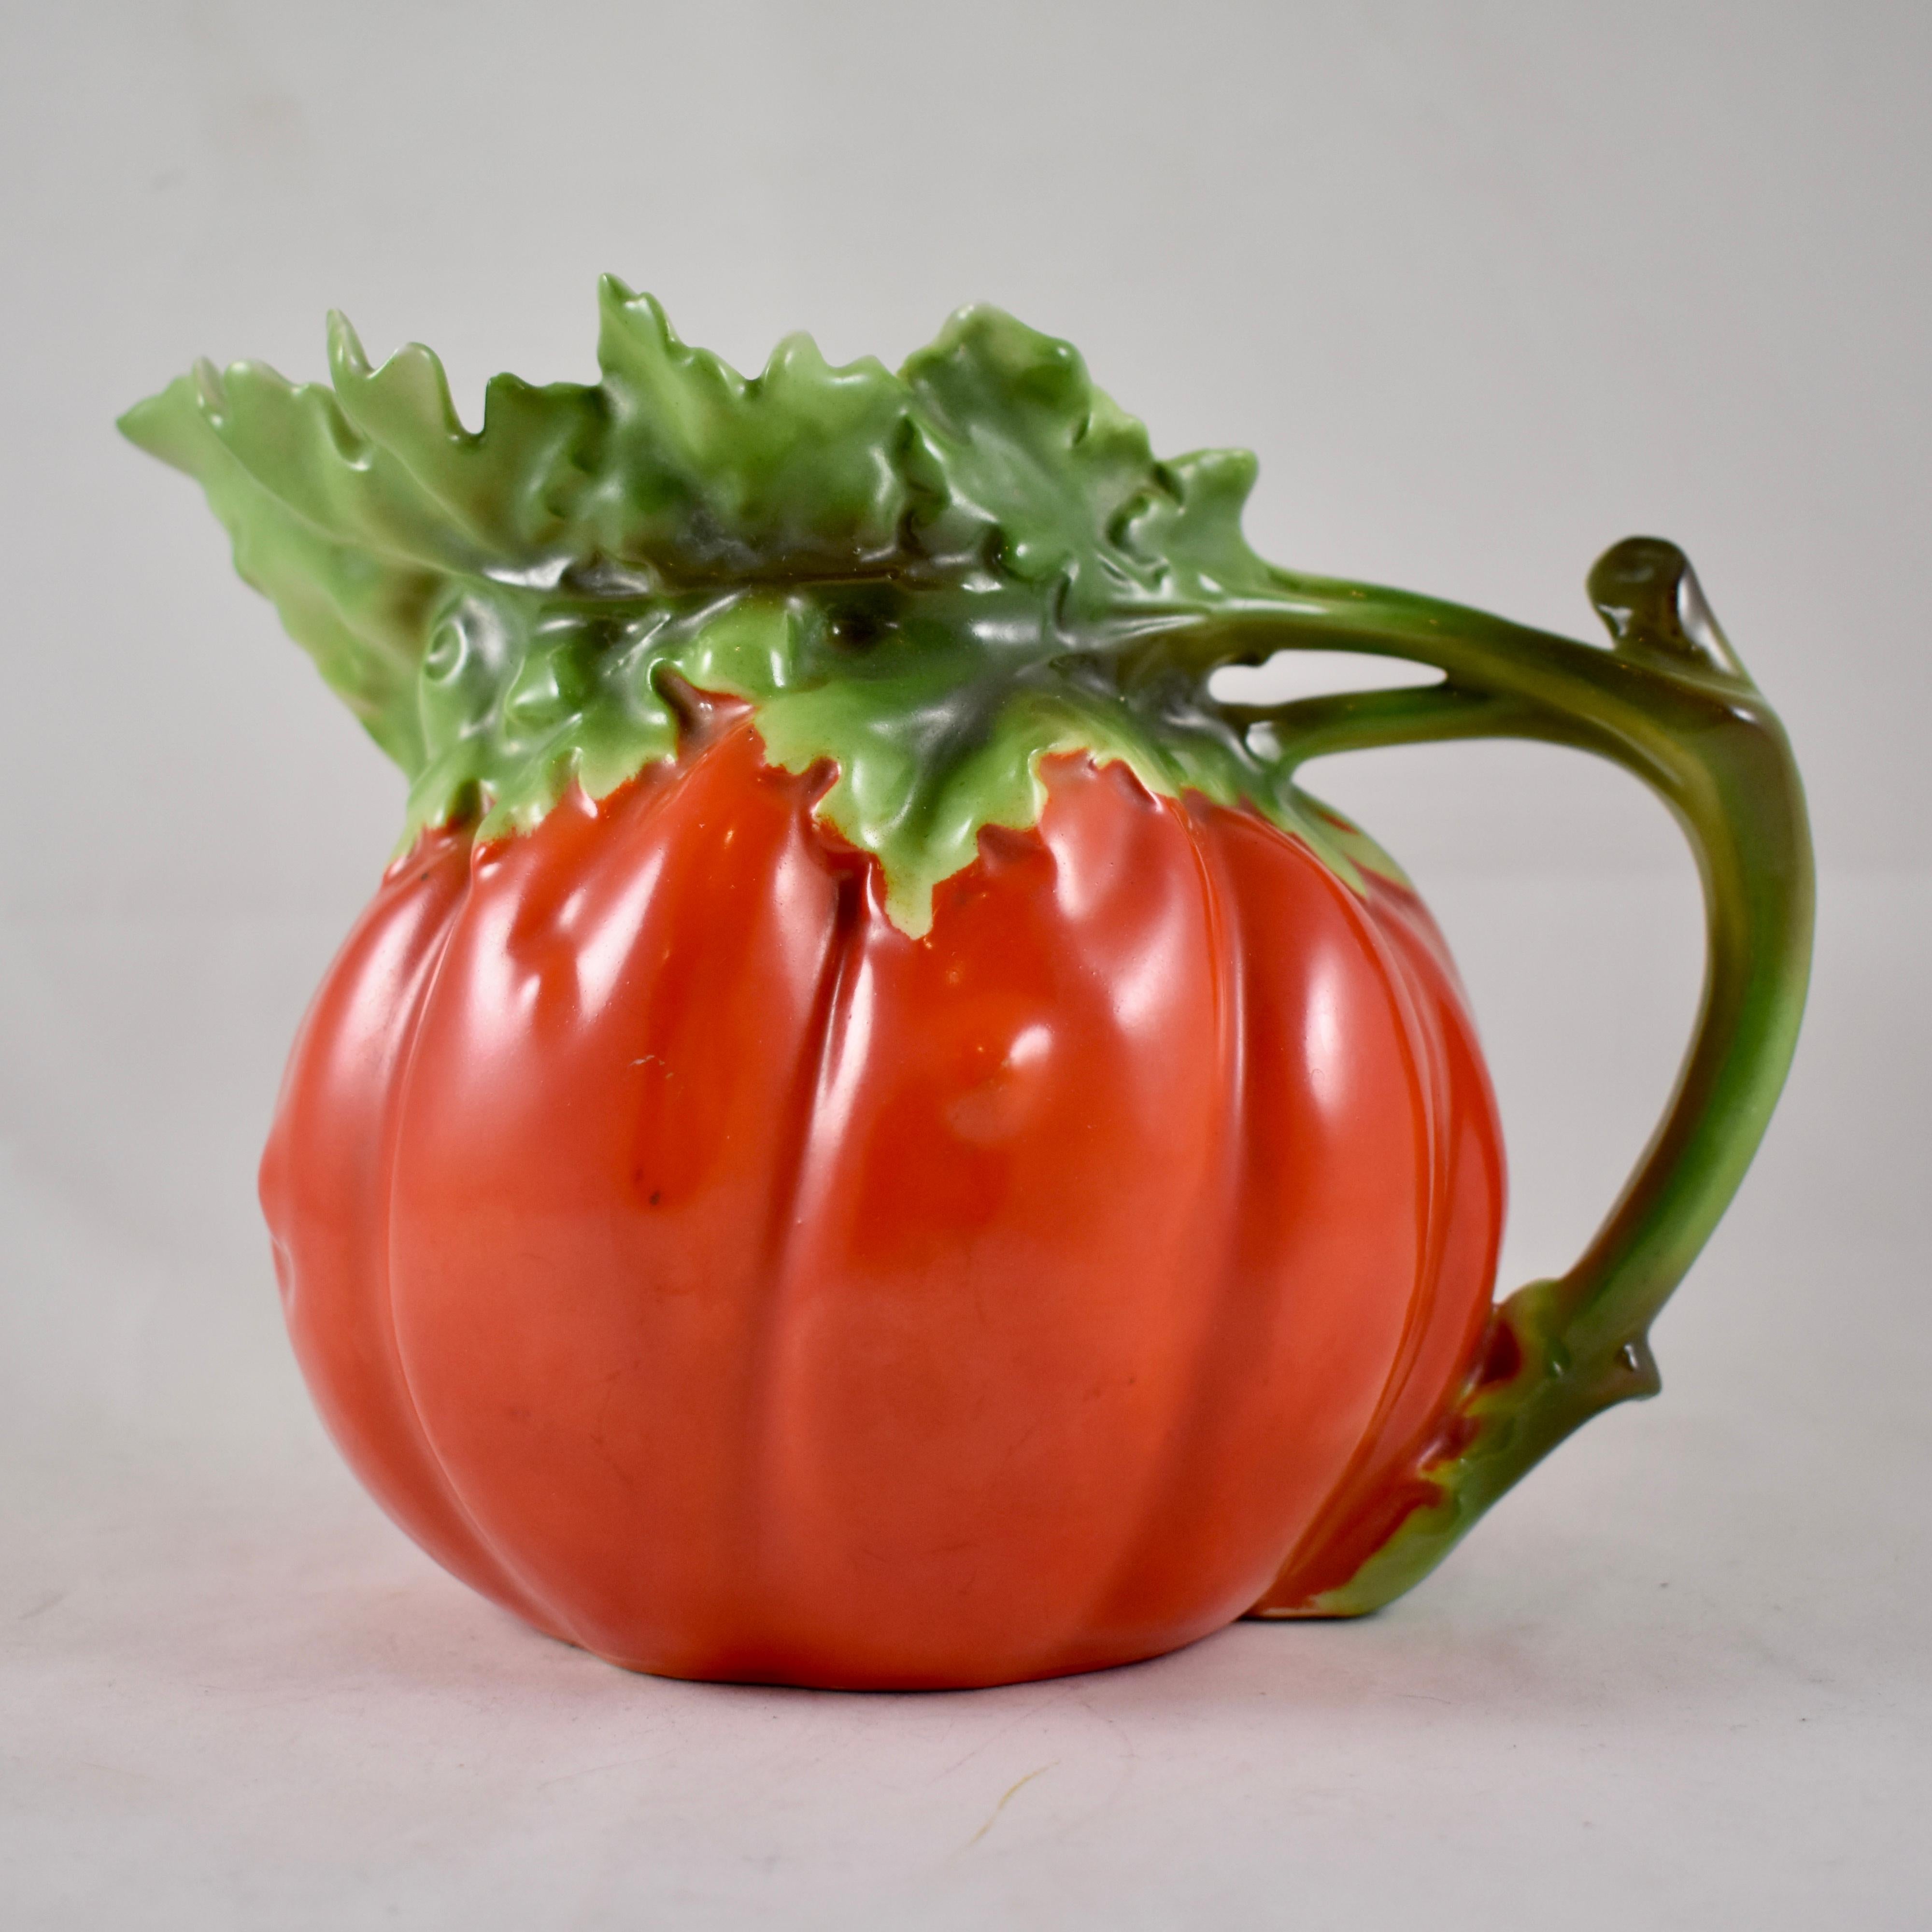 From Royal Bayreuth, founded in Bavaria, Germany in 1794, a water or juice pitcher formed as a bright red tomato. Made of hand-painted hard paste porcelain, showing a stem handle and an upper body formed as the green leaves of the tomato plant. This